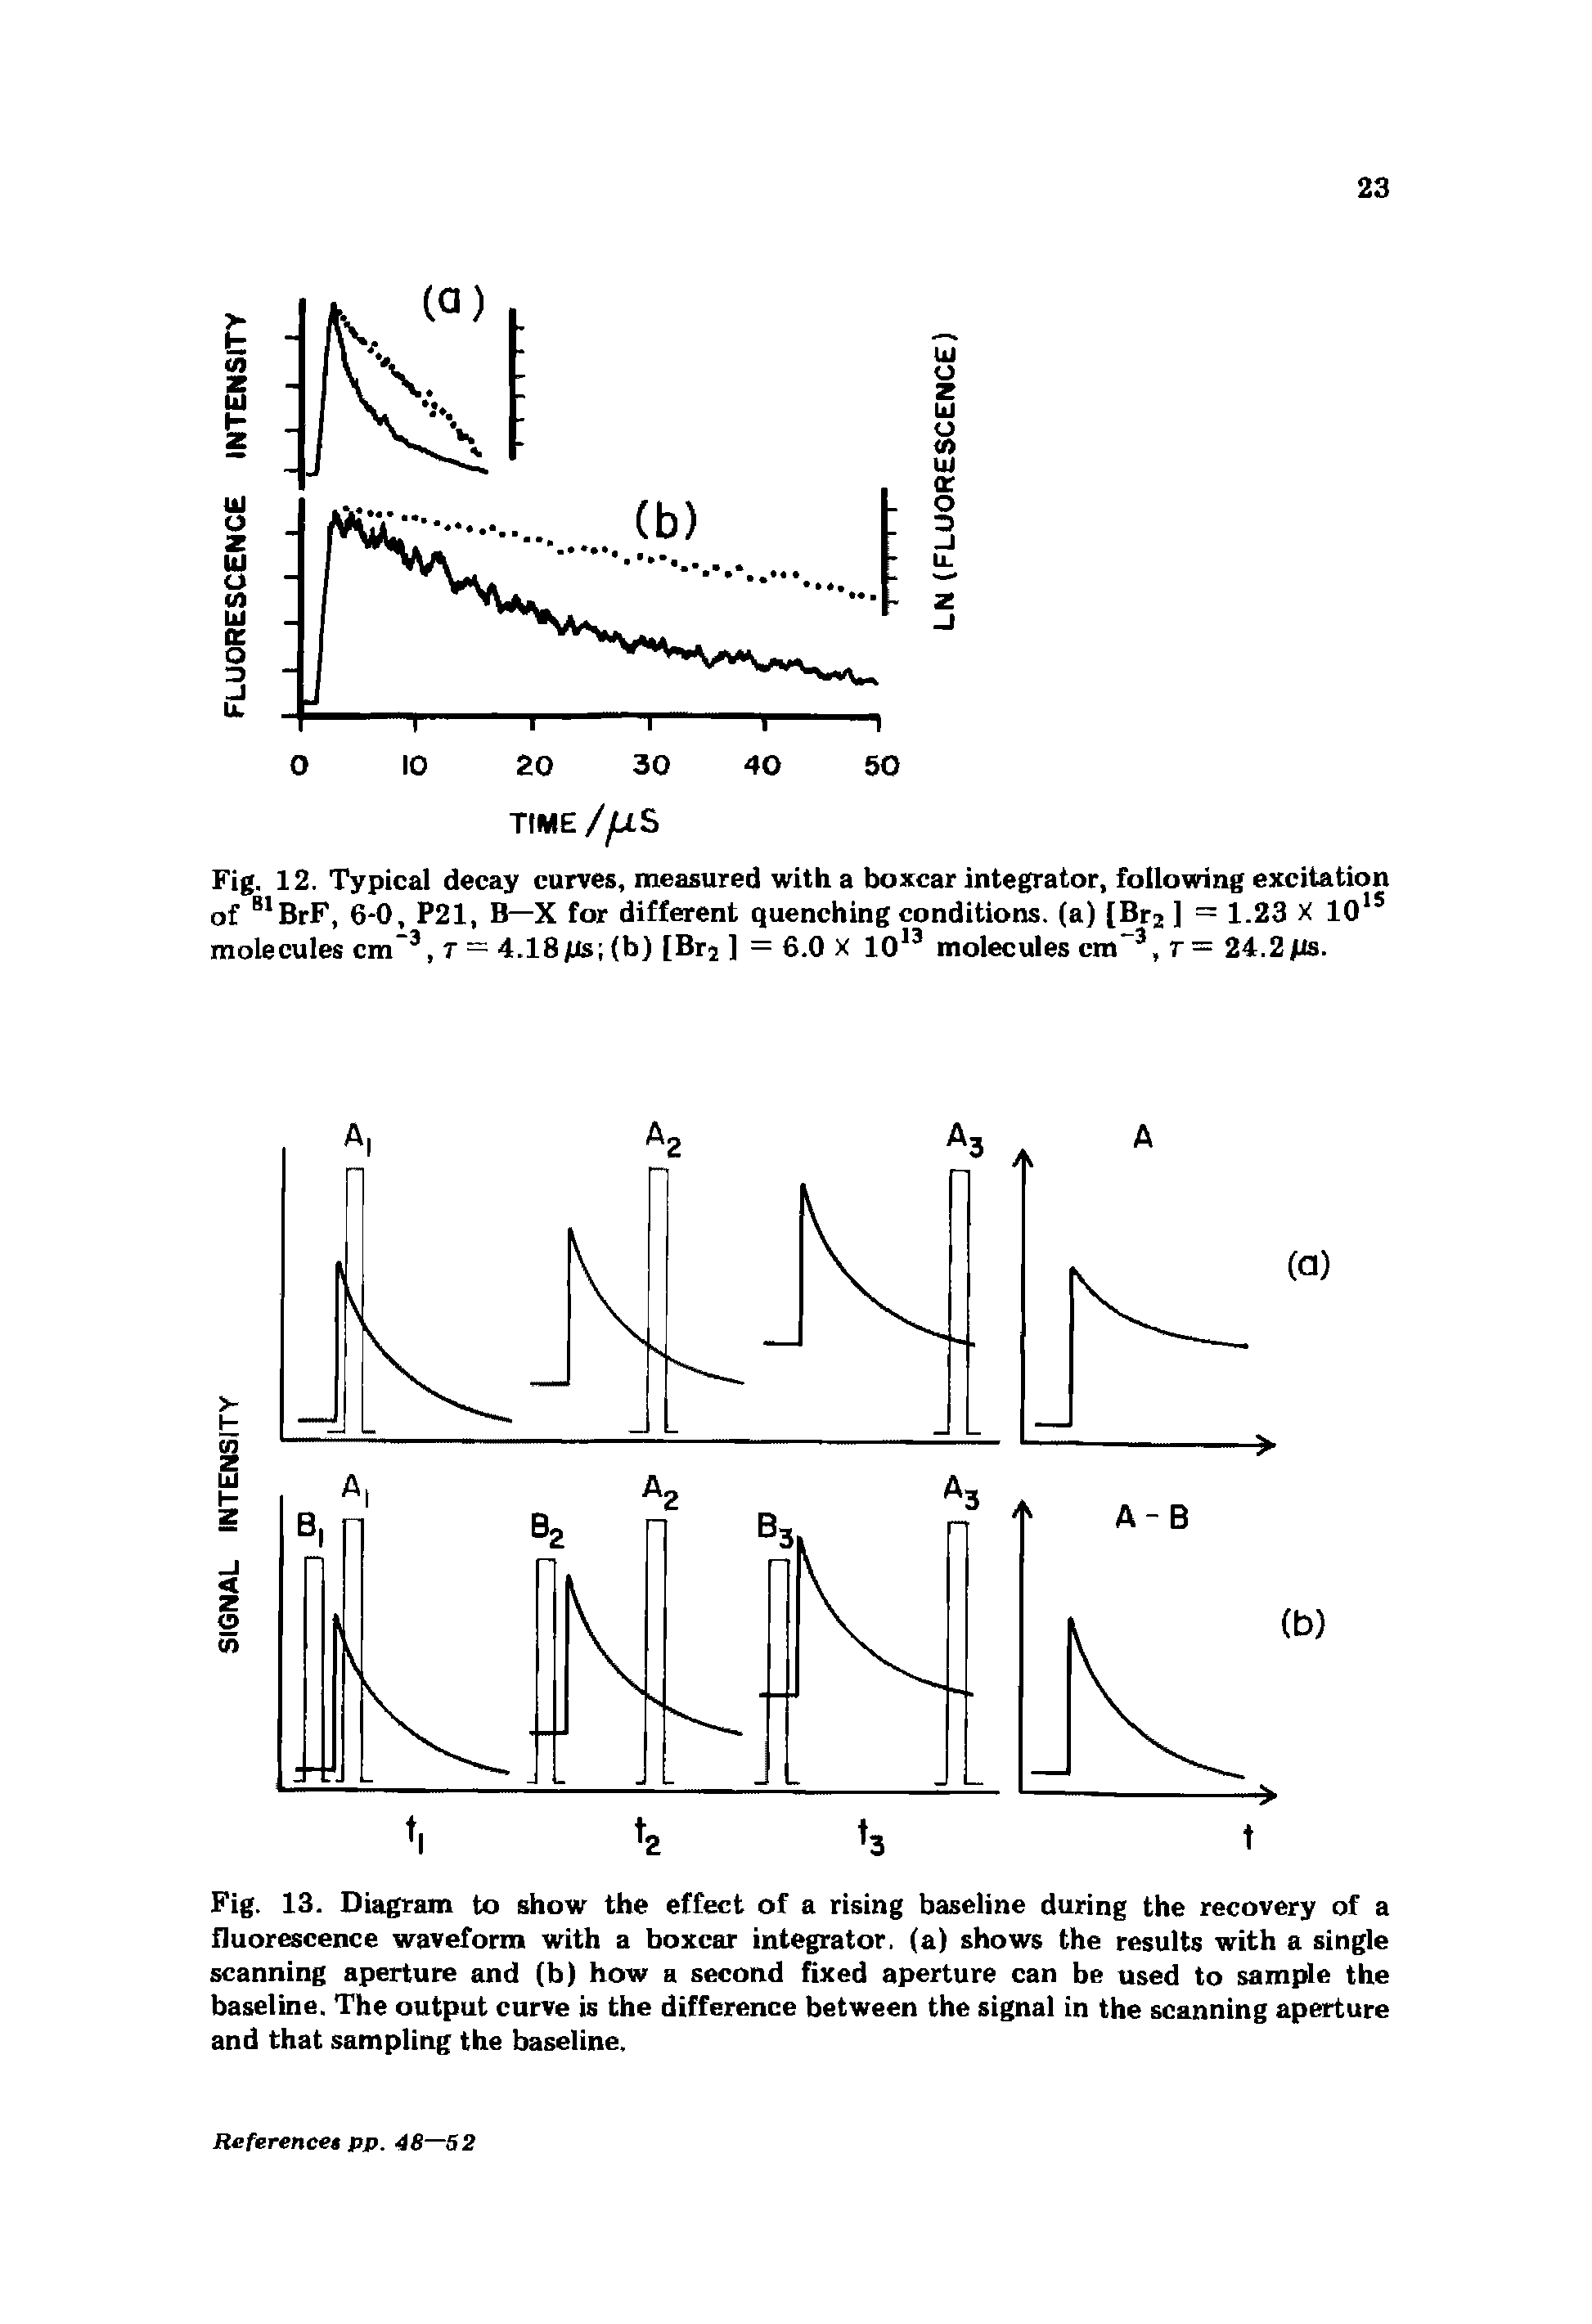 Fig. 13. Diagram to show the effect of a rising baseline during the recovery of a fluorescence waveform with a boxcar integrator, (a) shows the results with a single scanning aperture and (b) how a second fixed aperture can be used to sample the baseline. The output curve is the difference between the signal in the scanning aperture and that sampling the baseline.